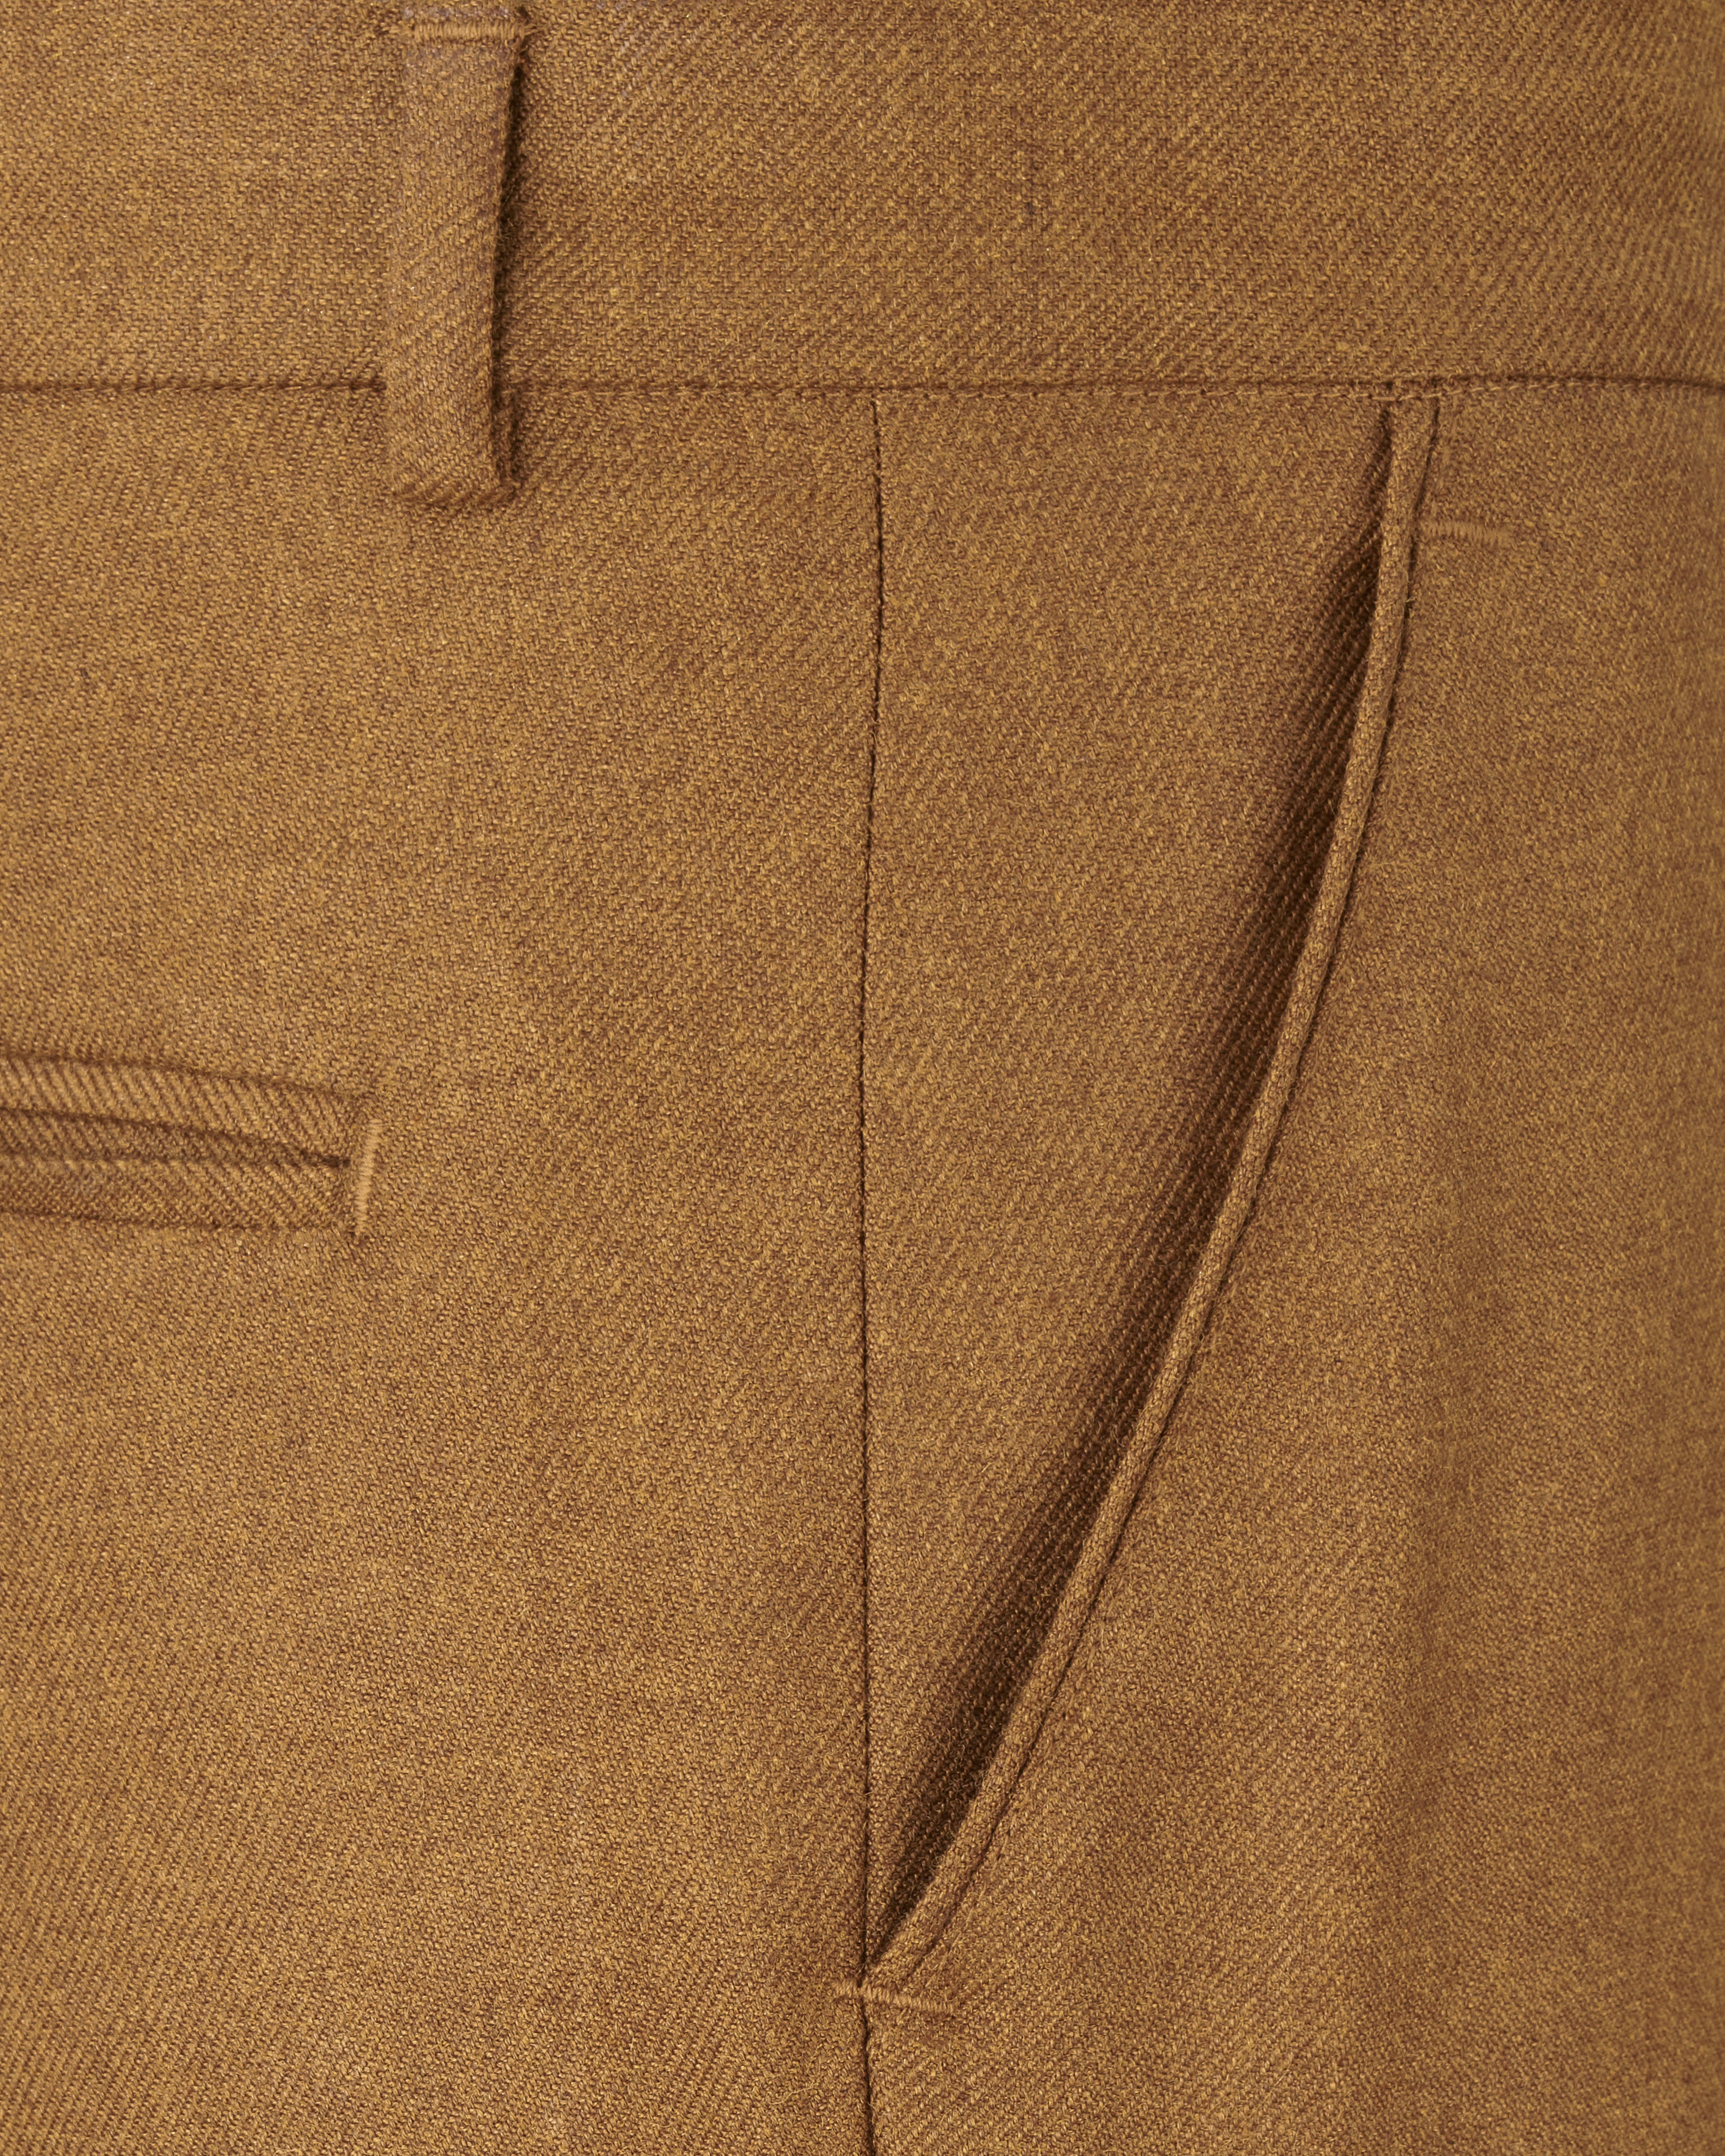 Cape Palliser Brown Wool Rich Double Breasted Trench Coat With Pants TCPT2530-DB-D35-36, TCPT2530-DB-D35-38, TCPT2530-DB-D35-40, TCPT2530-DB-D35-42, TCPT2530-DB-D35-44, TCPT2530-DB-D35-46, TCPT2530-DB-D35-48, TCPT2530-DB-D35-50, TCPT2530-DB-D35-T2, TCPT2530-DB-D35-54, TCPT2530-DB-D35-56, TCPT2530-DB-D35-58, TCPT2530-DB-D35-60